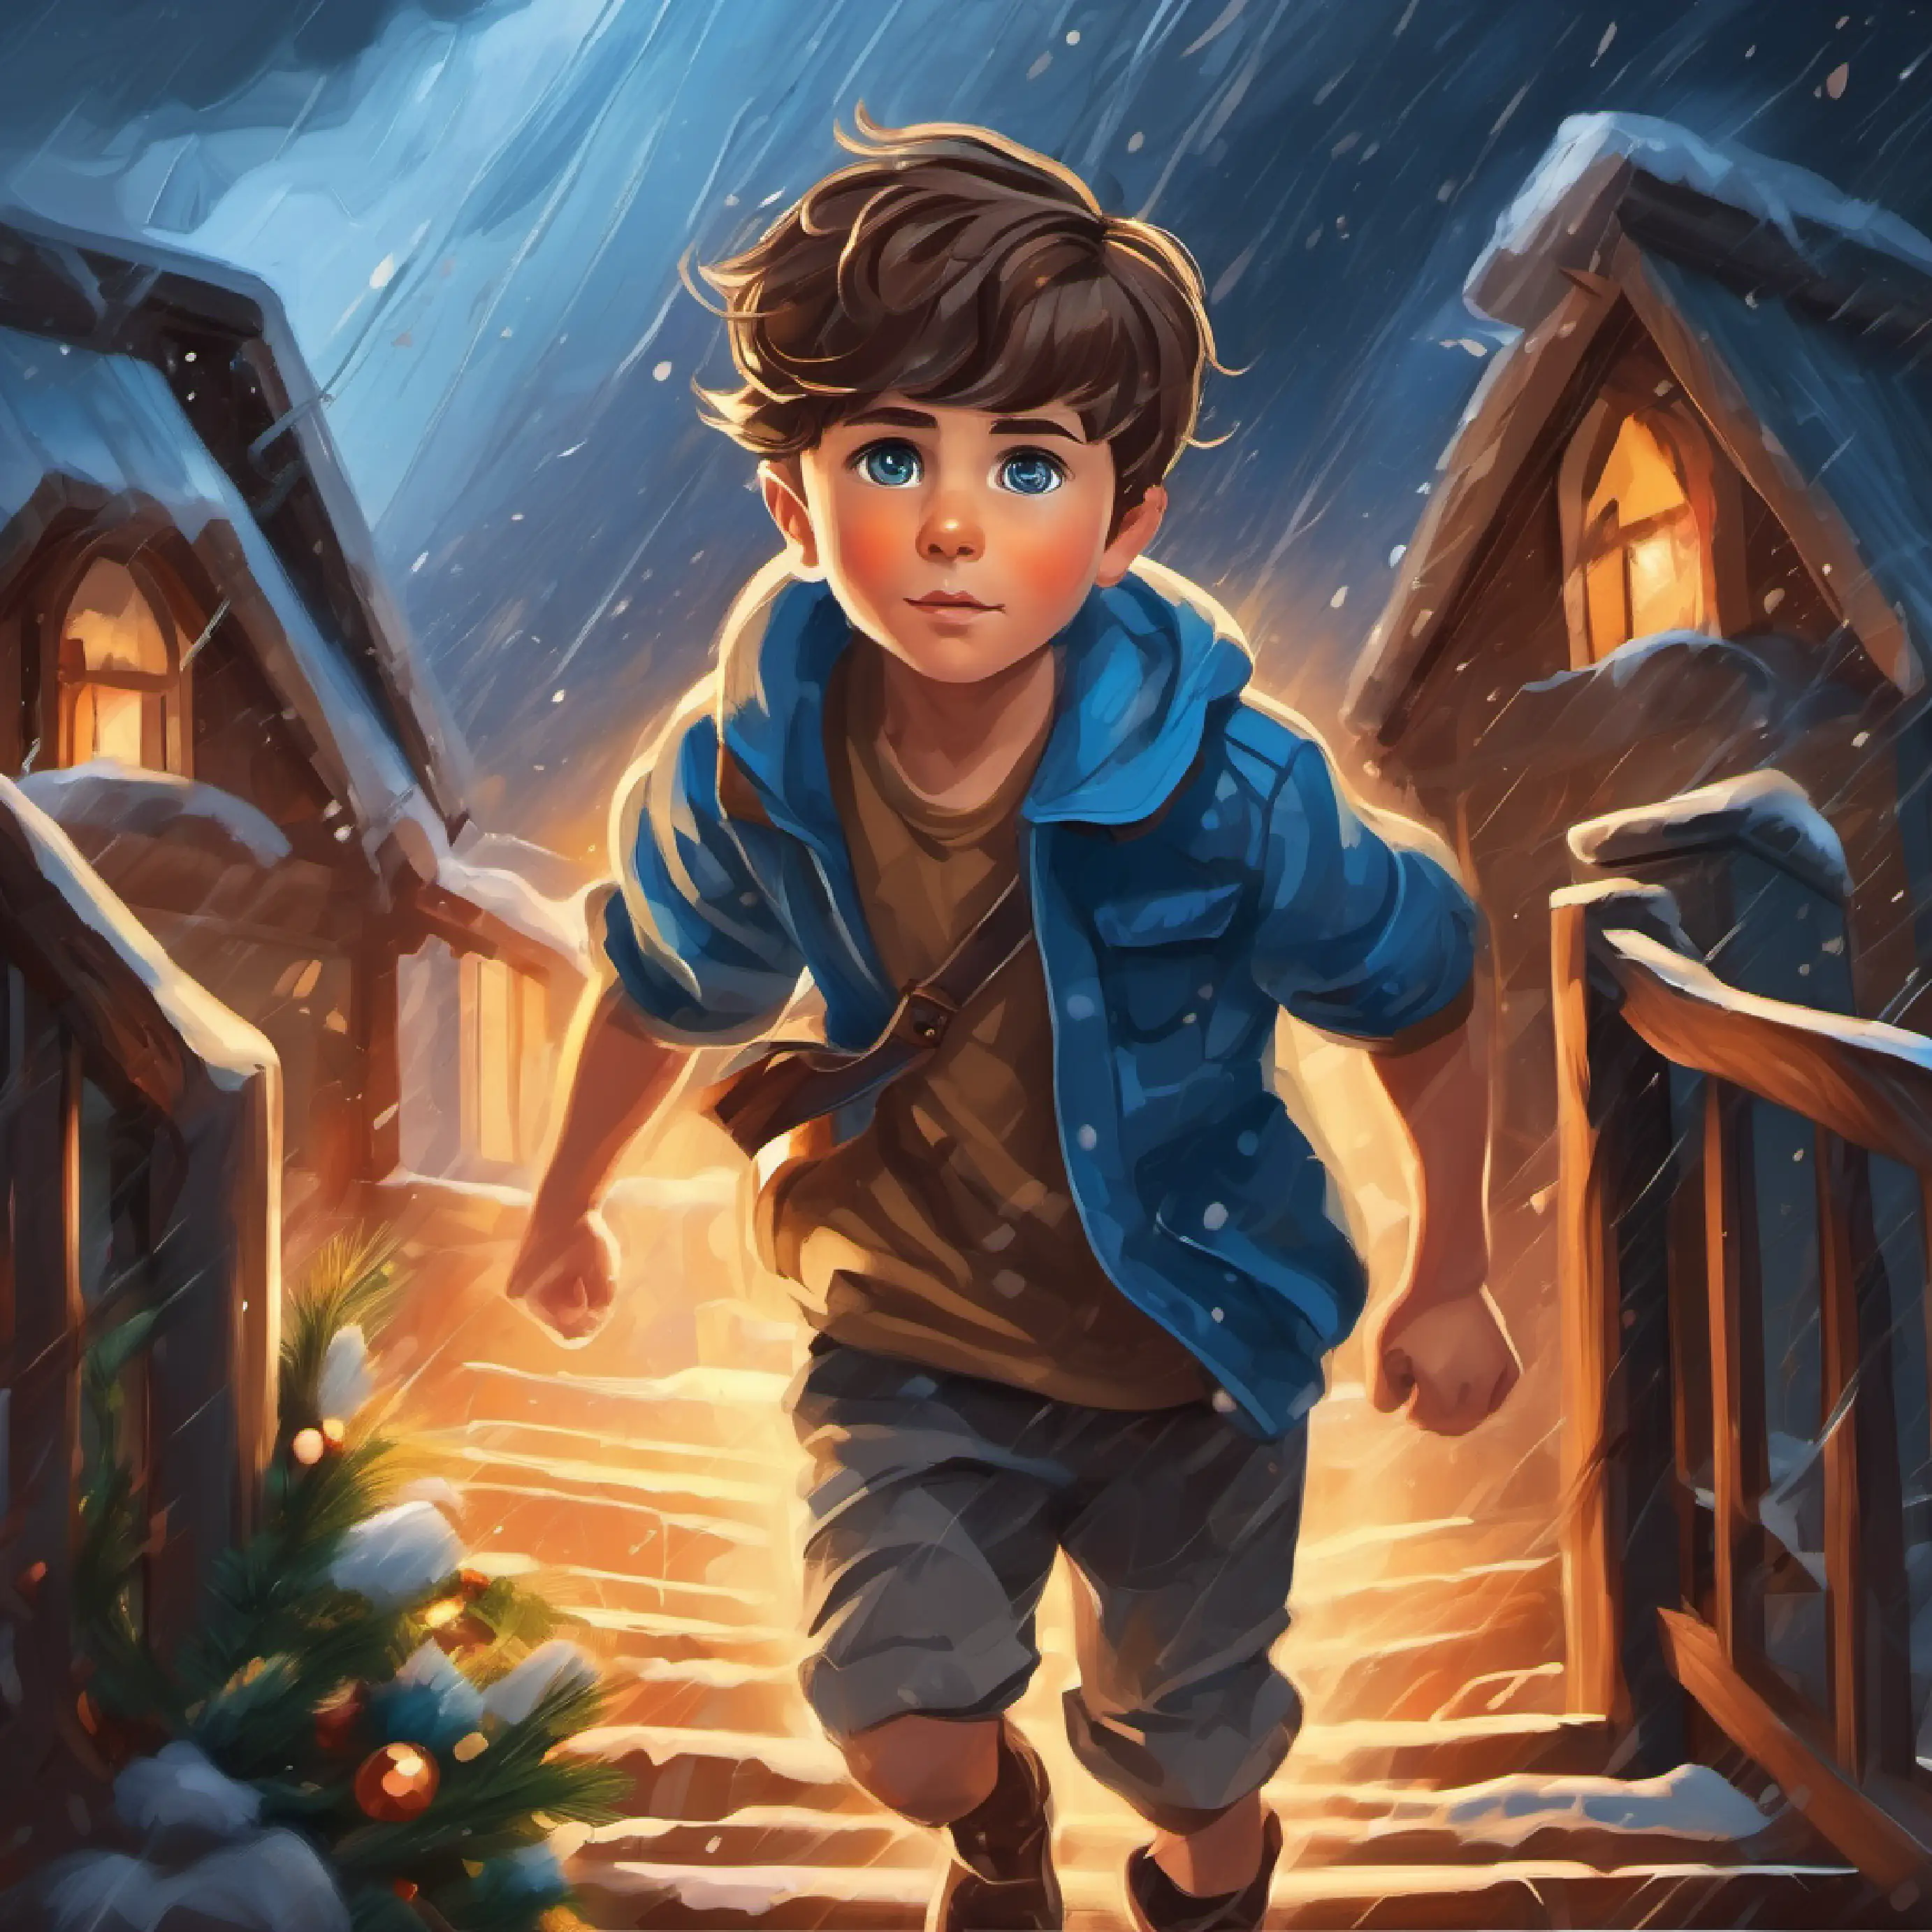 Young boy, adventurous spirit, brown hair, blue eyes steps outside, drawn to the power of the storm.